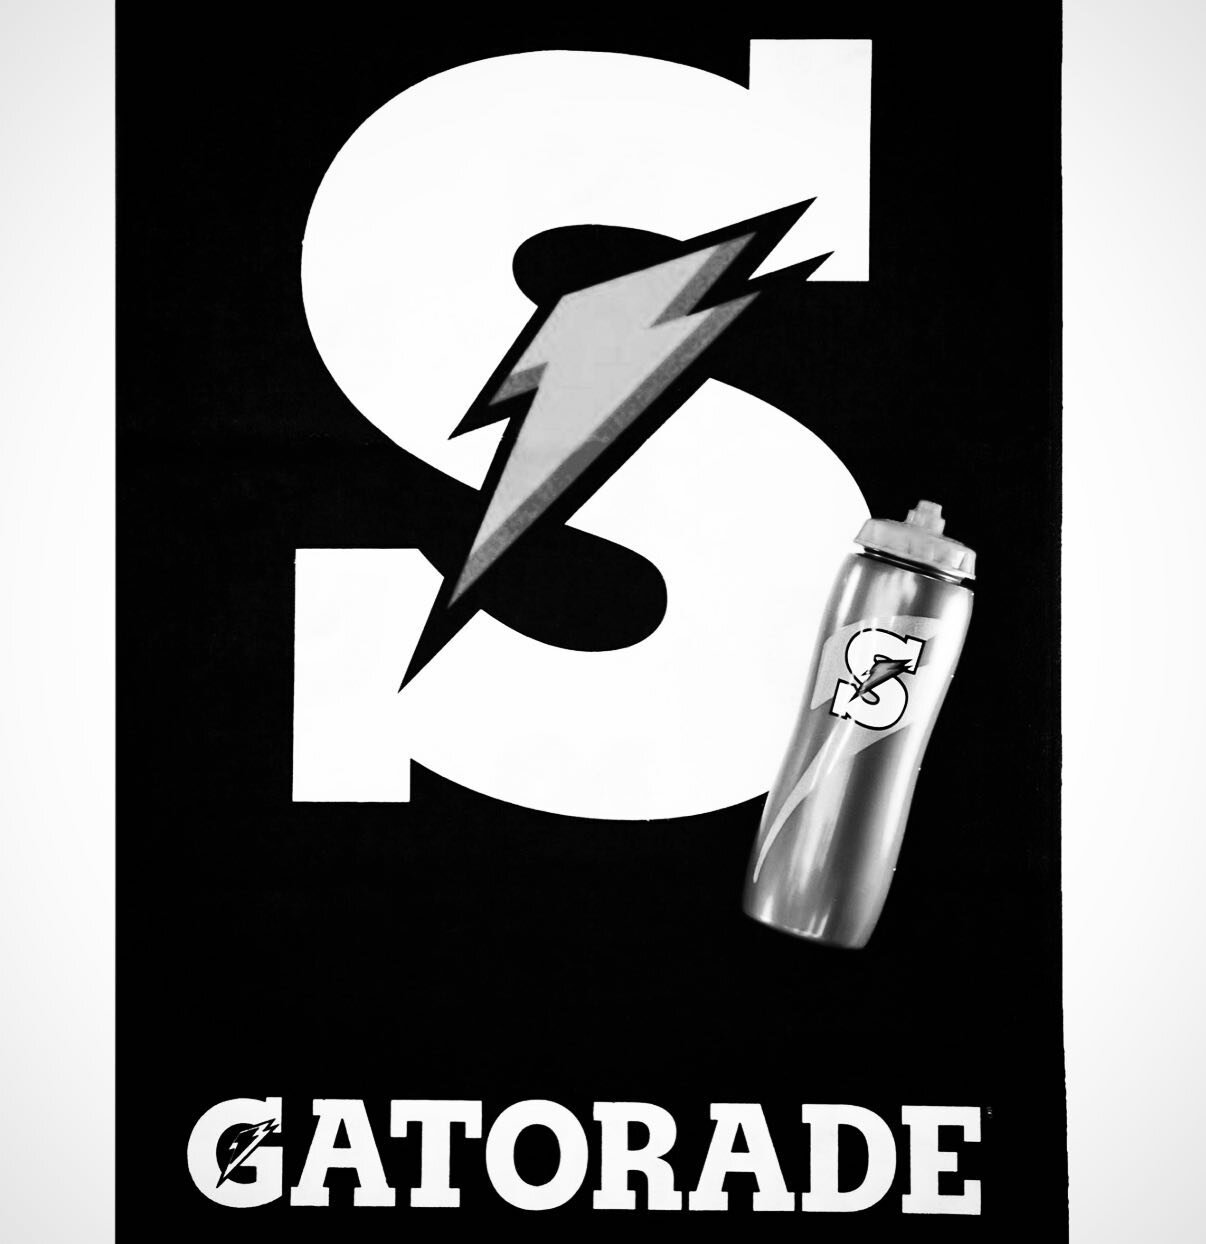 In honour of the incredible @serenawilliams the team at Gatorade swapped out the traditional G in their branding for the S. It&rsquo;s a powerful statement honouring a powerful and longtime partnership. 

#baldwinandbrant #intersectionofbrandsandfans